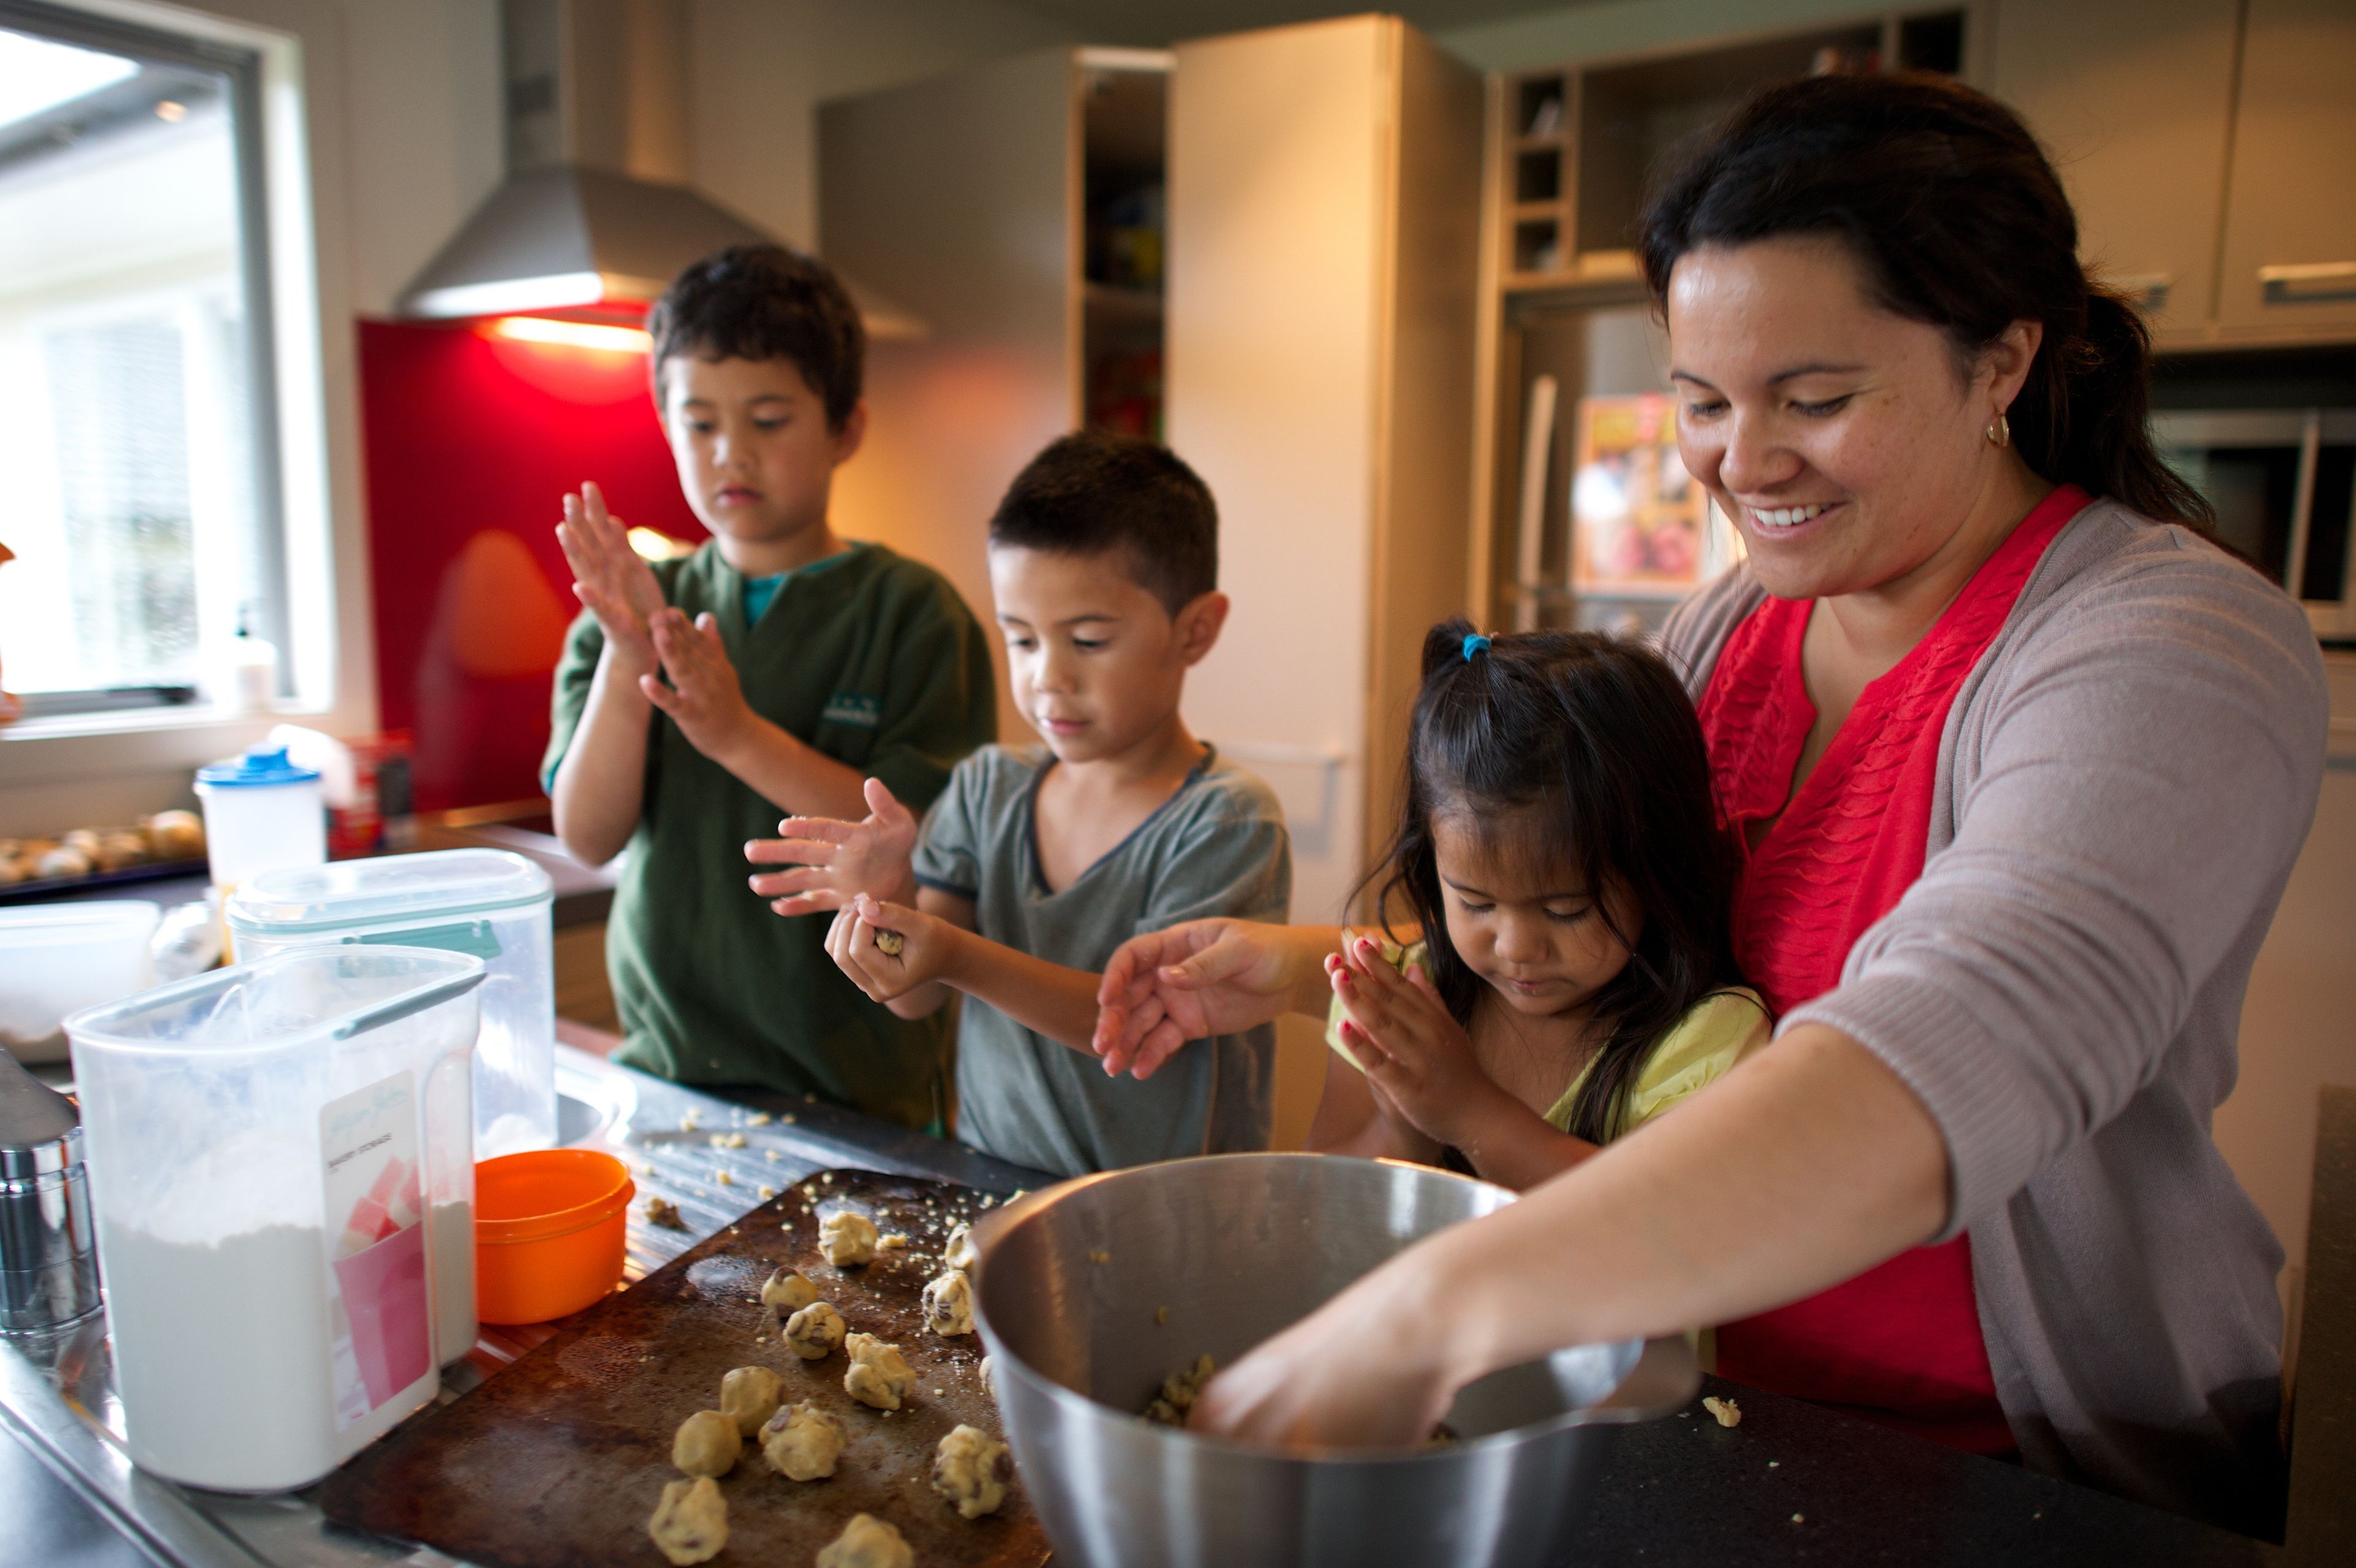 A mother bakes cookies with her children in the kitchen.